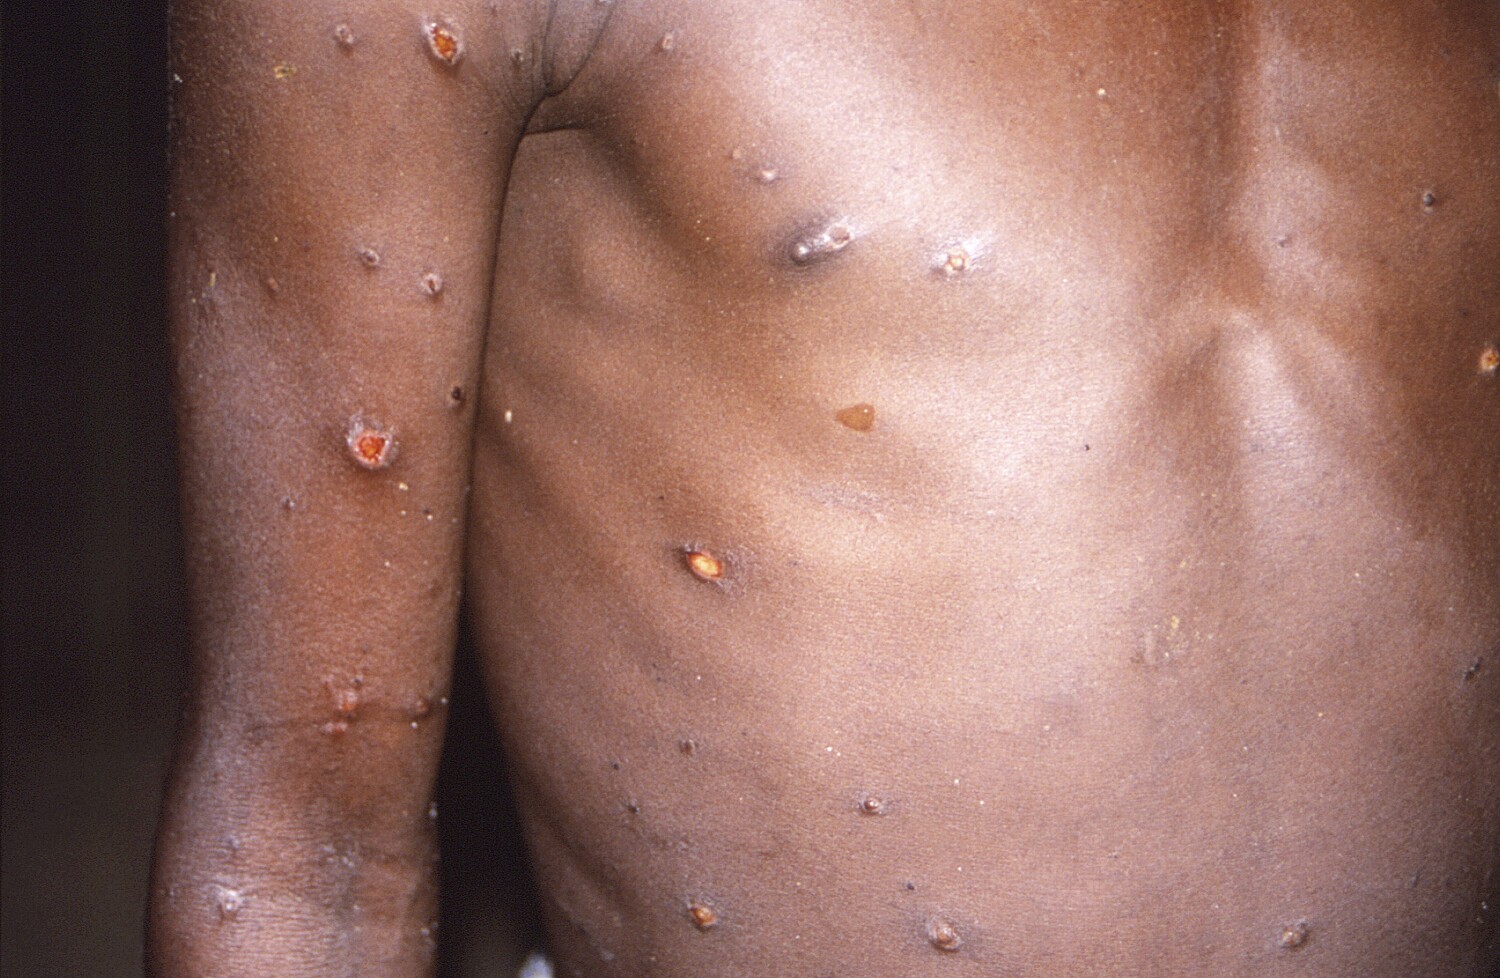 San Francisco reports first suspected monkeypox case